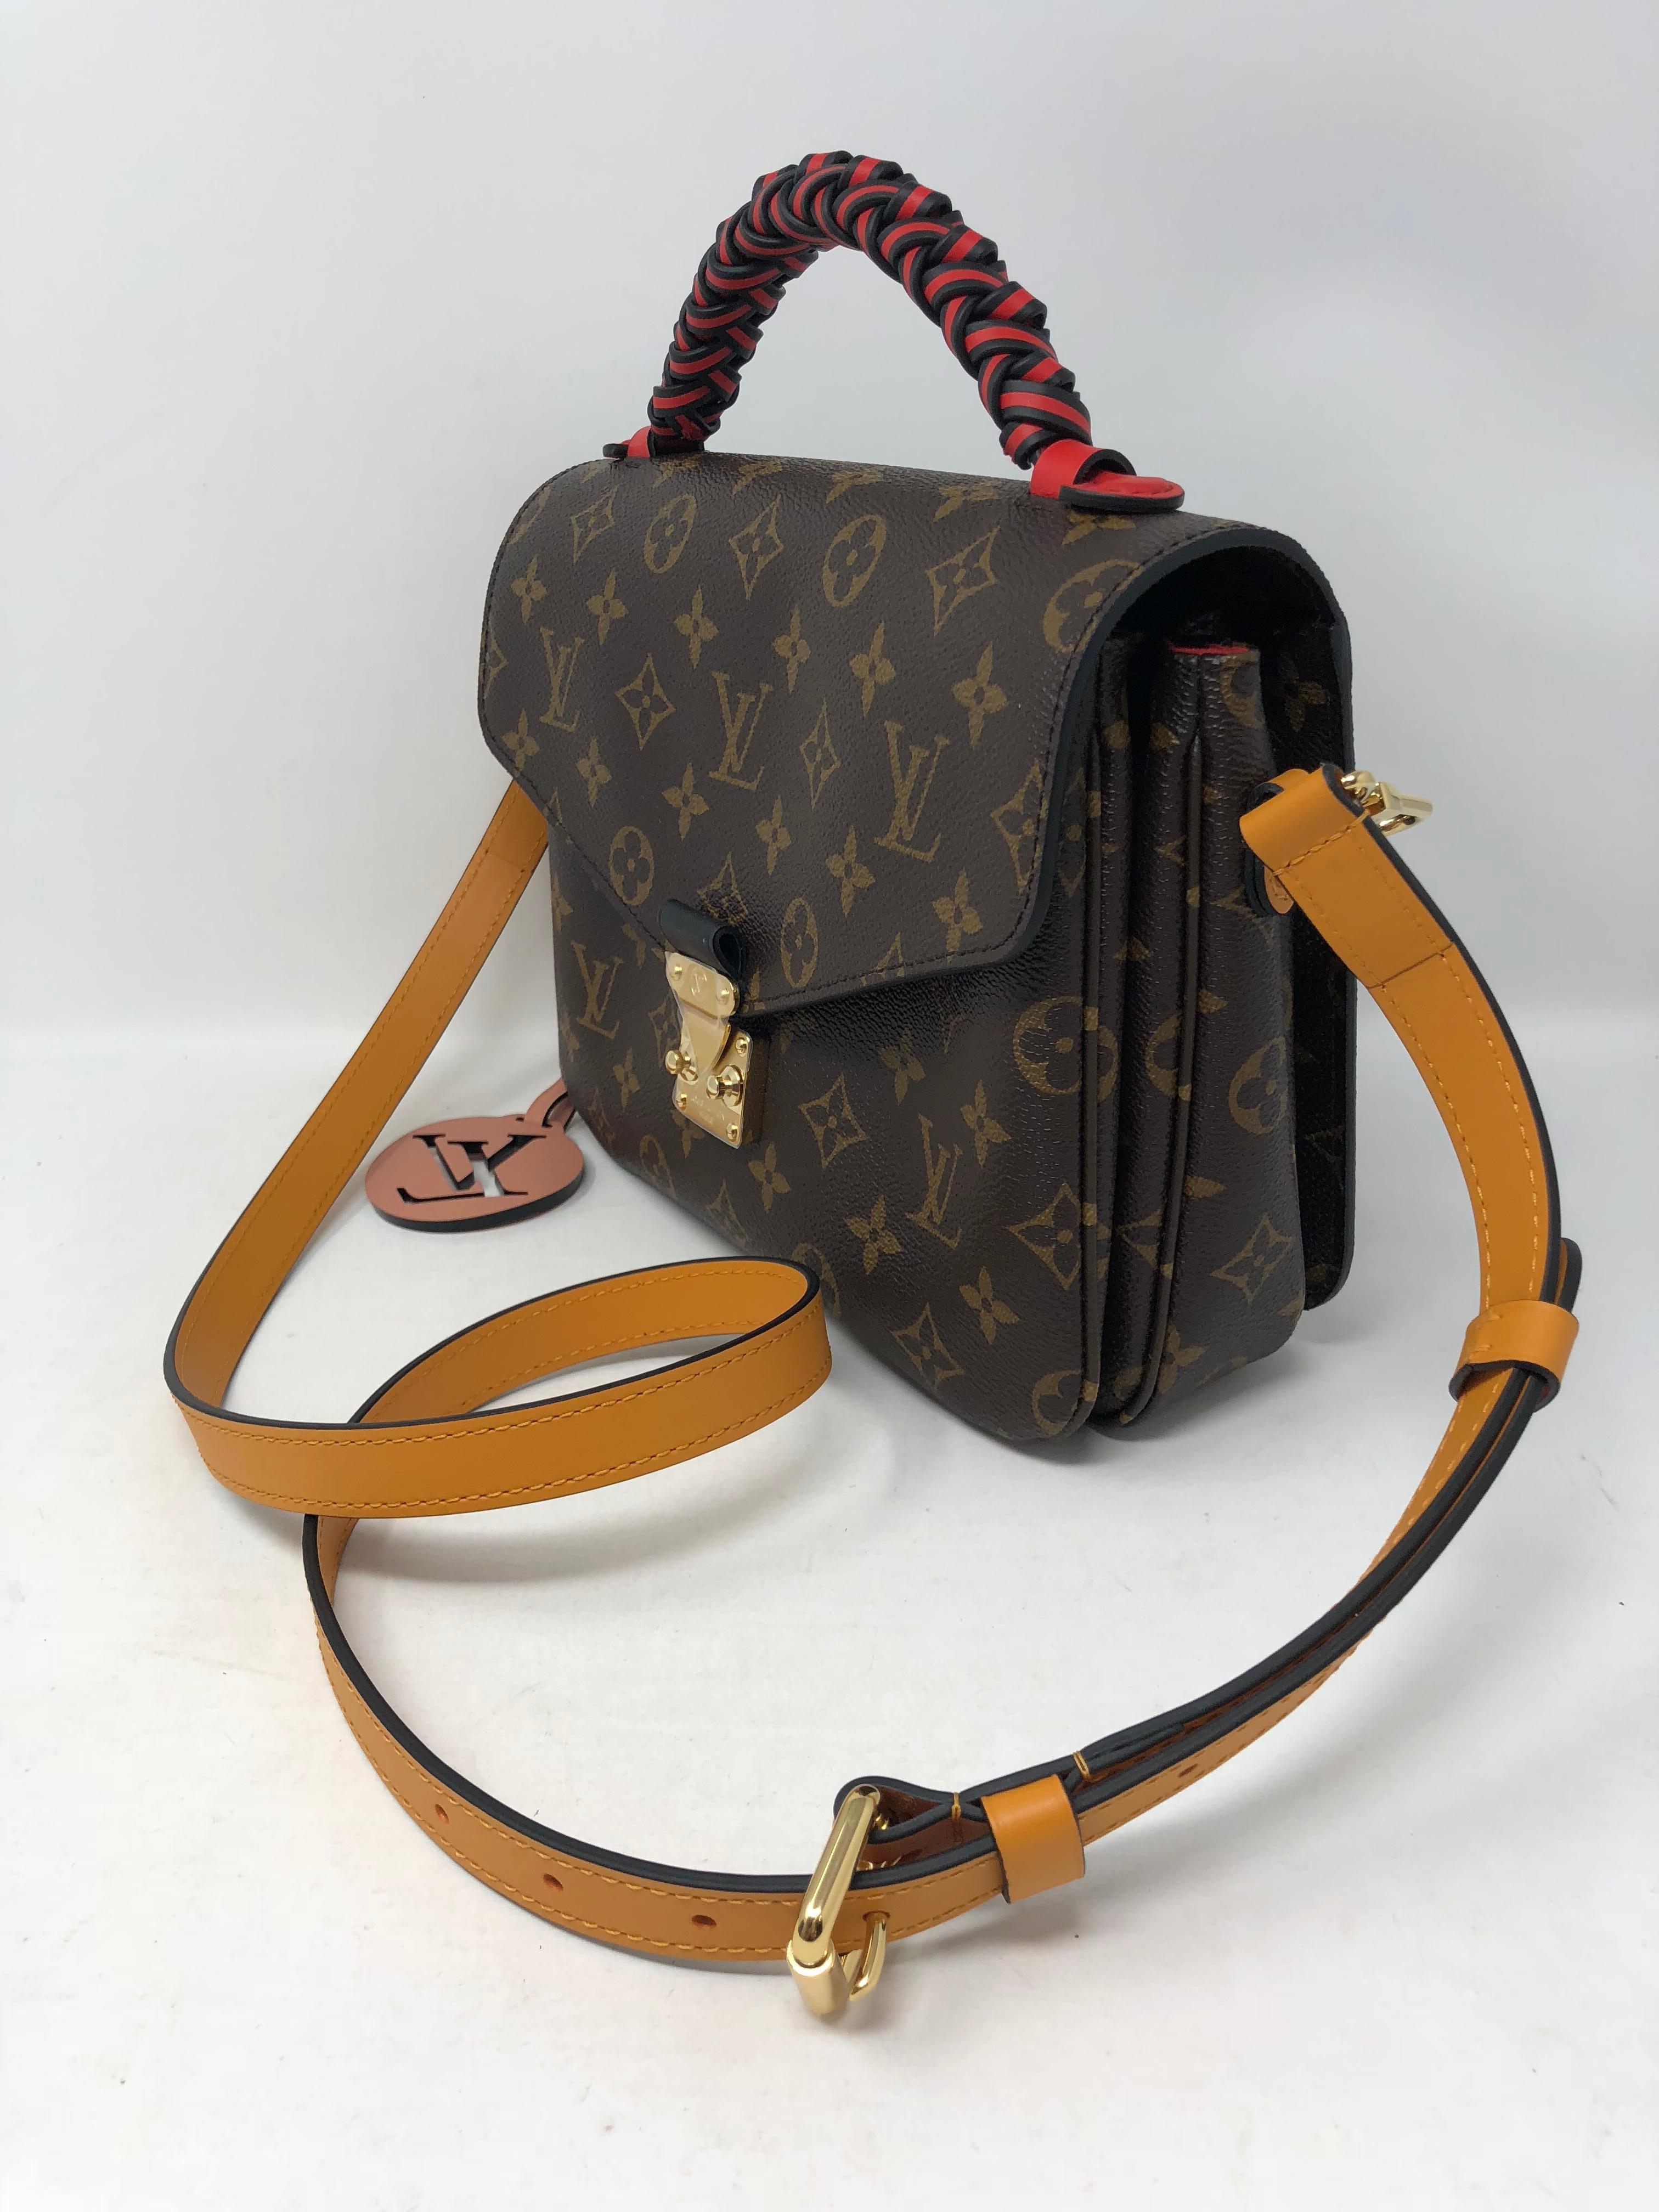 Louis Vuitton Pochette Metis Limited Edition Braided Handle coated with red and brown leather. Beautiful design. Never used and hard to get. Strap is detachable. Comes with full set. Original box and dust cover. Guaranteed authentic. 